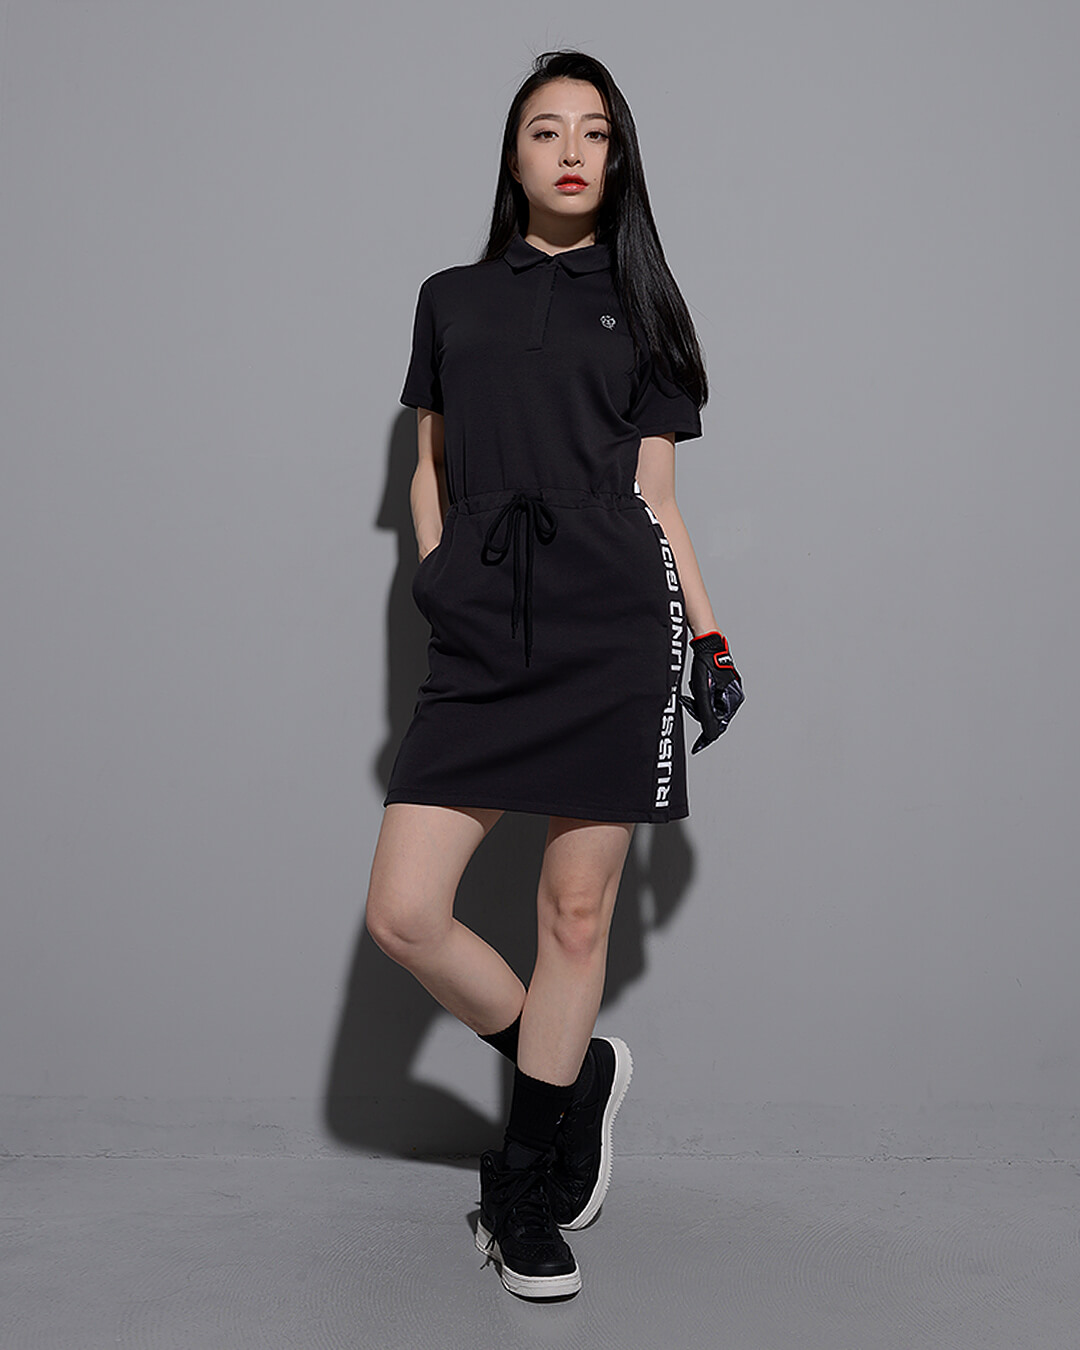 Russeluno Online Store / S/S POLO ONE-PIECE